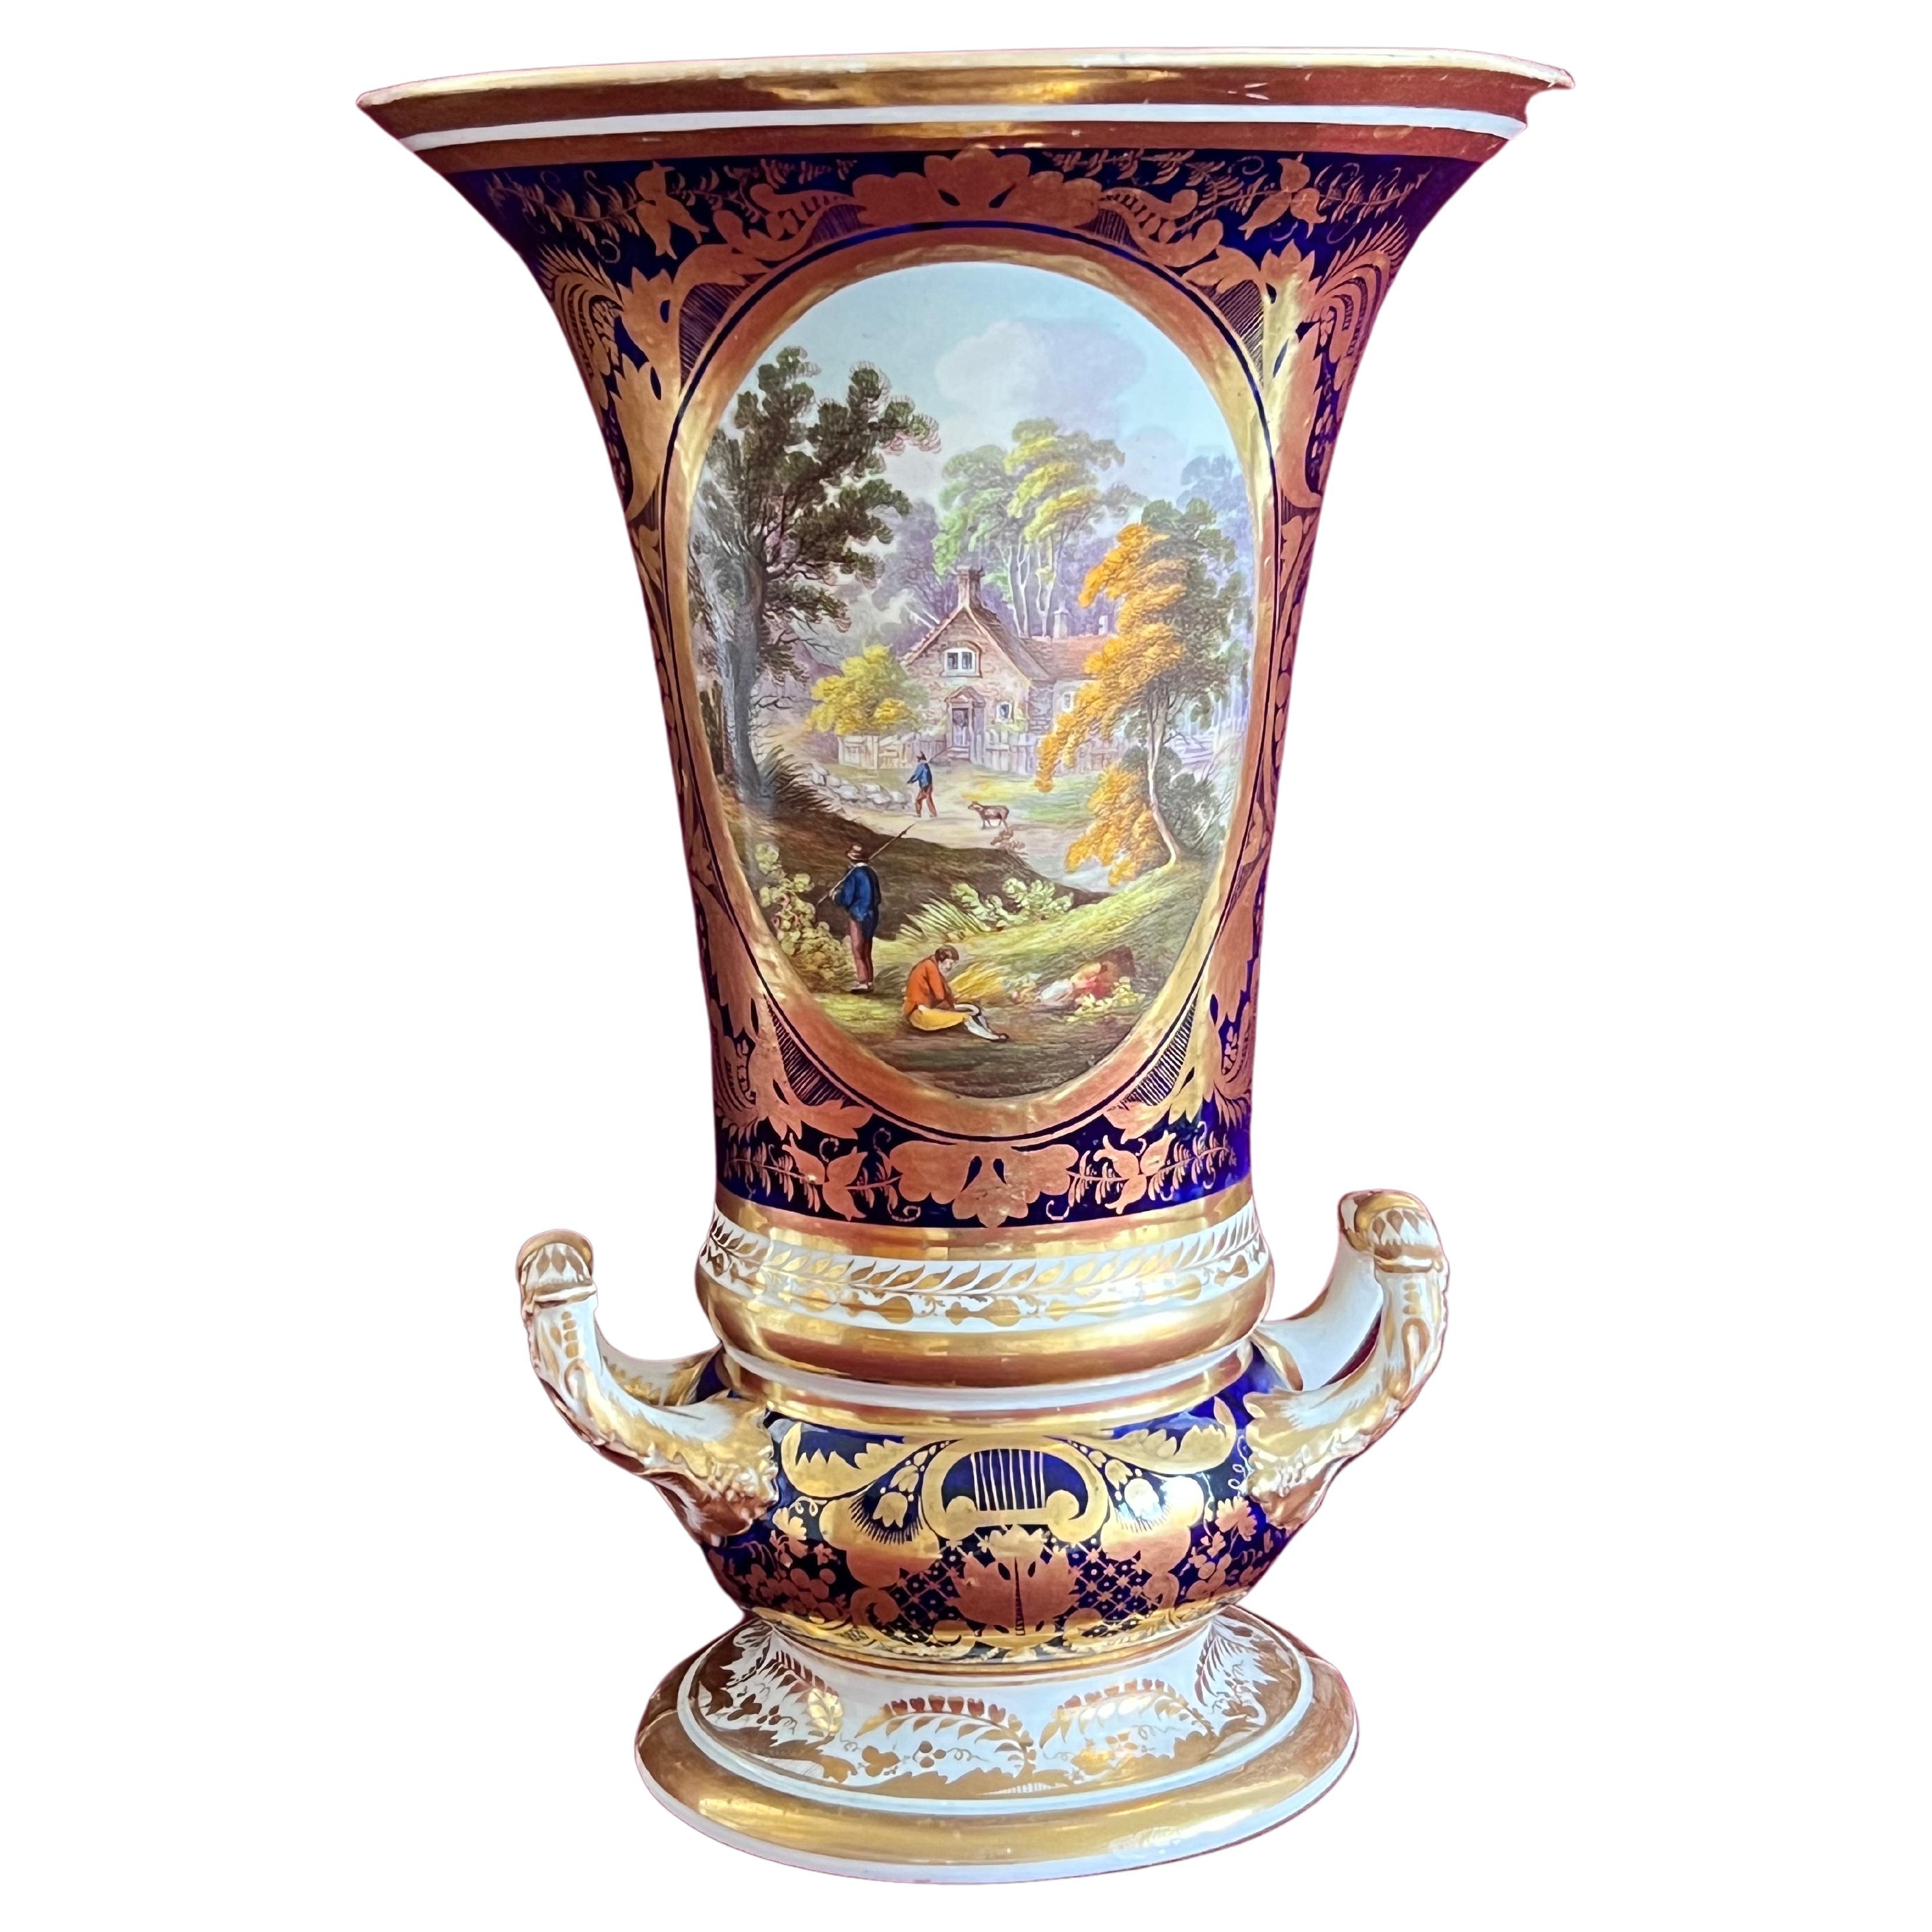 Fine Derby Porcelain Vase Decorated in the Manner of Brewer, circa 1810